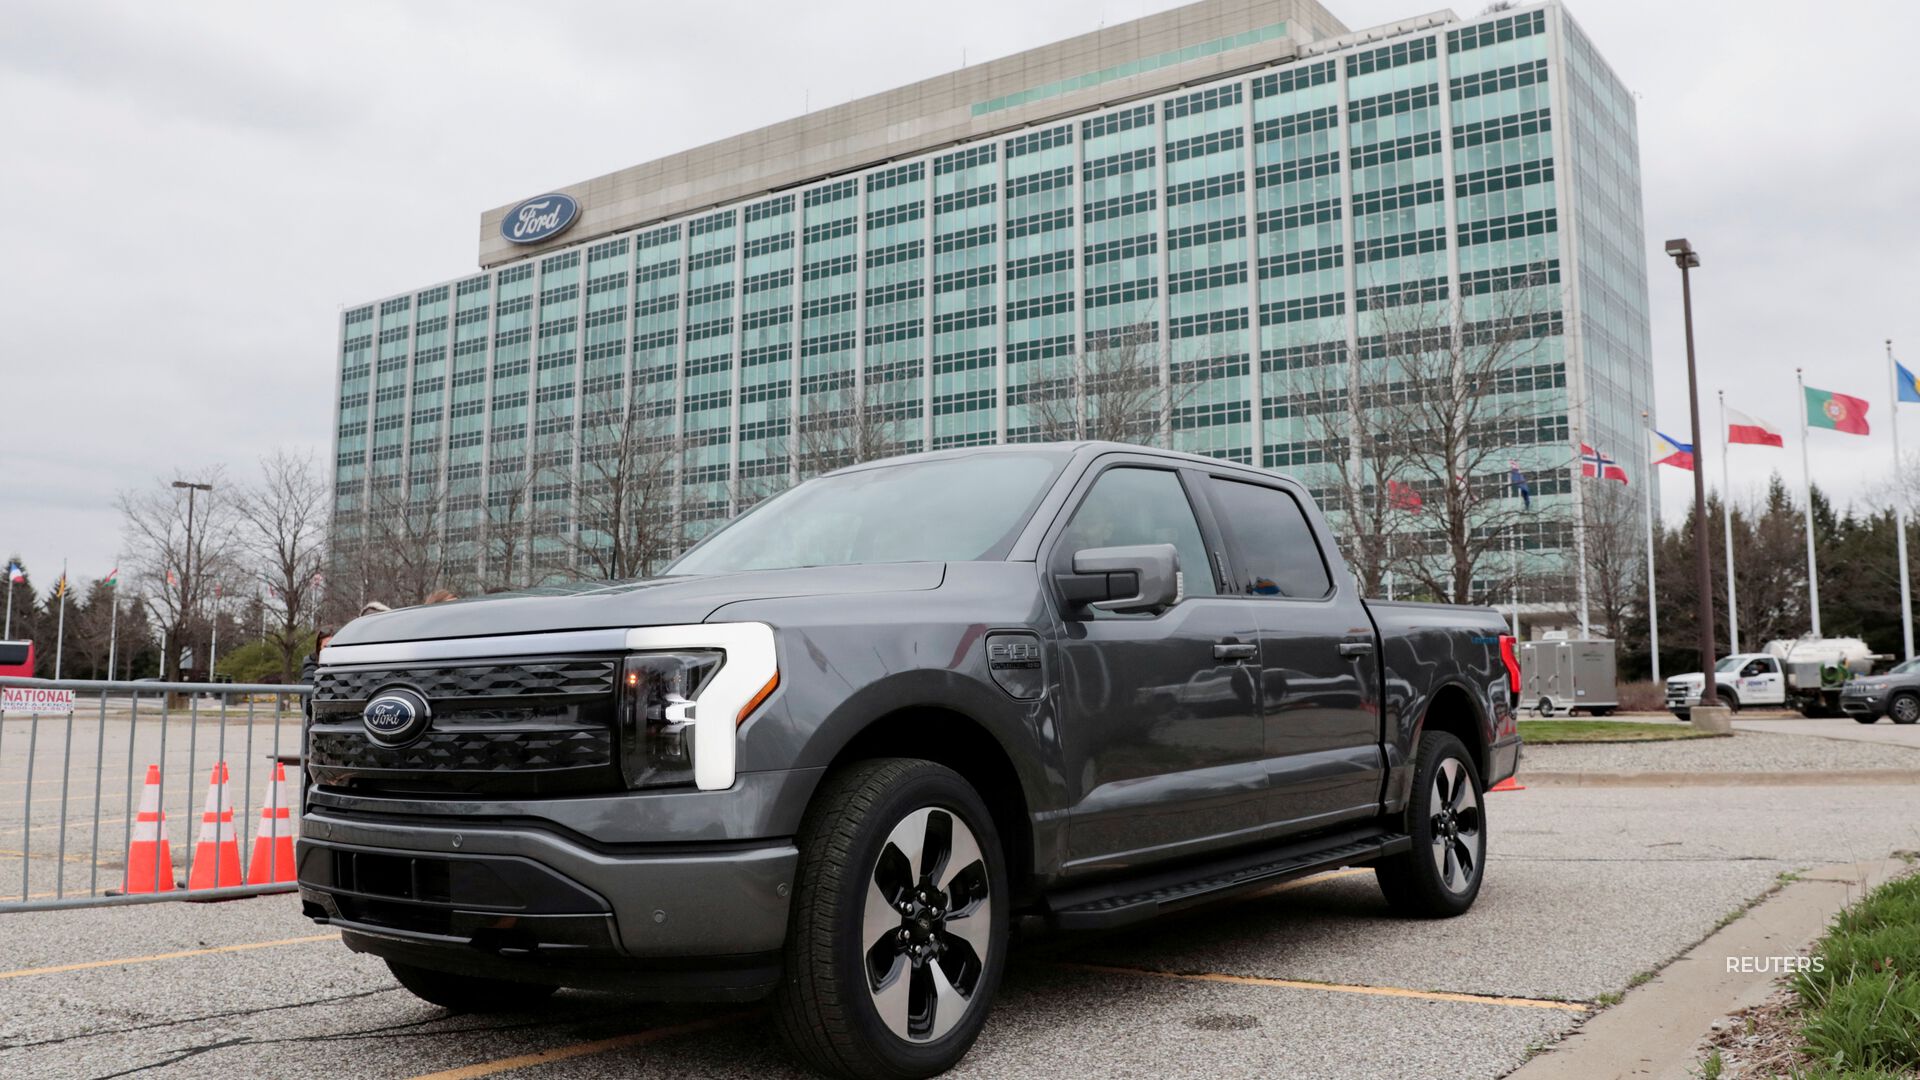 Ford announced Tuesday the starting price tag for its 2023 model increased by ,000, as electric vehicle prices climb amid a green energy push.